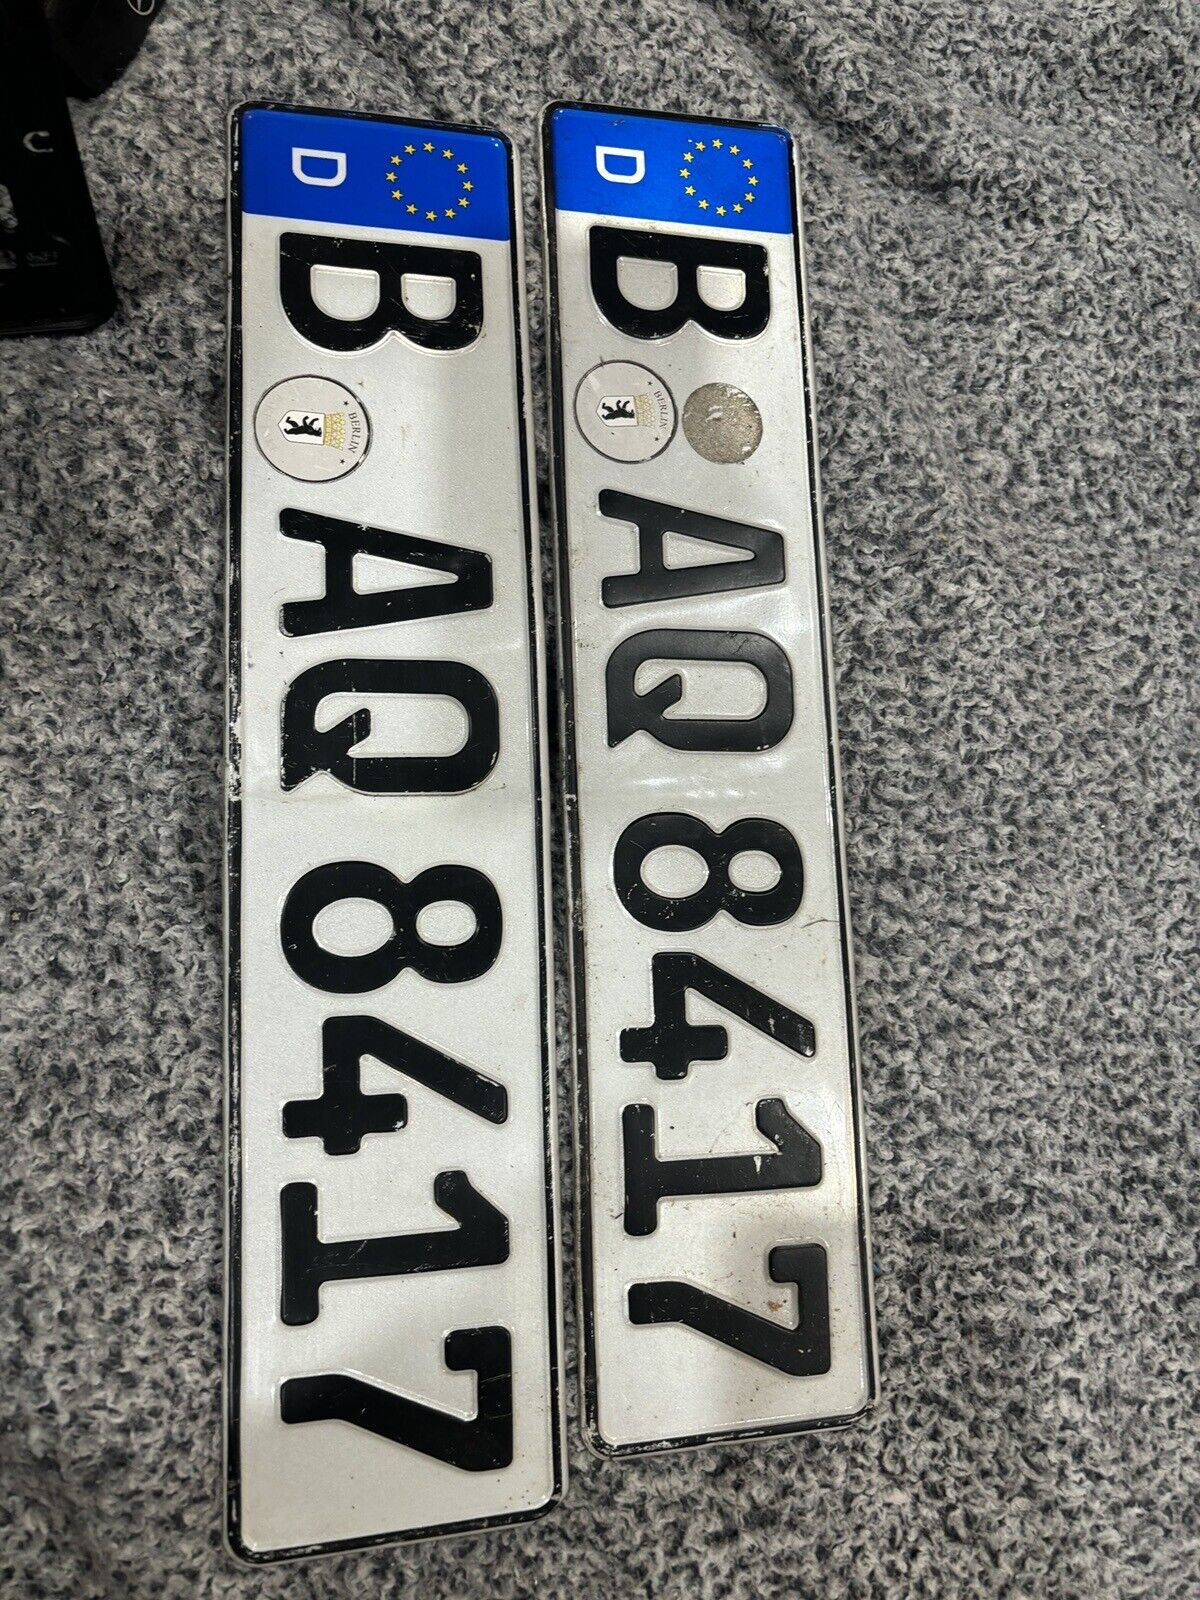 REAL GERMAN LICENSE PLATE AUTO NUMBER CAR BMW MERCEDES BENZ WITH EURO BRACKETS